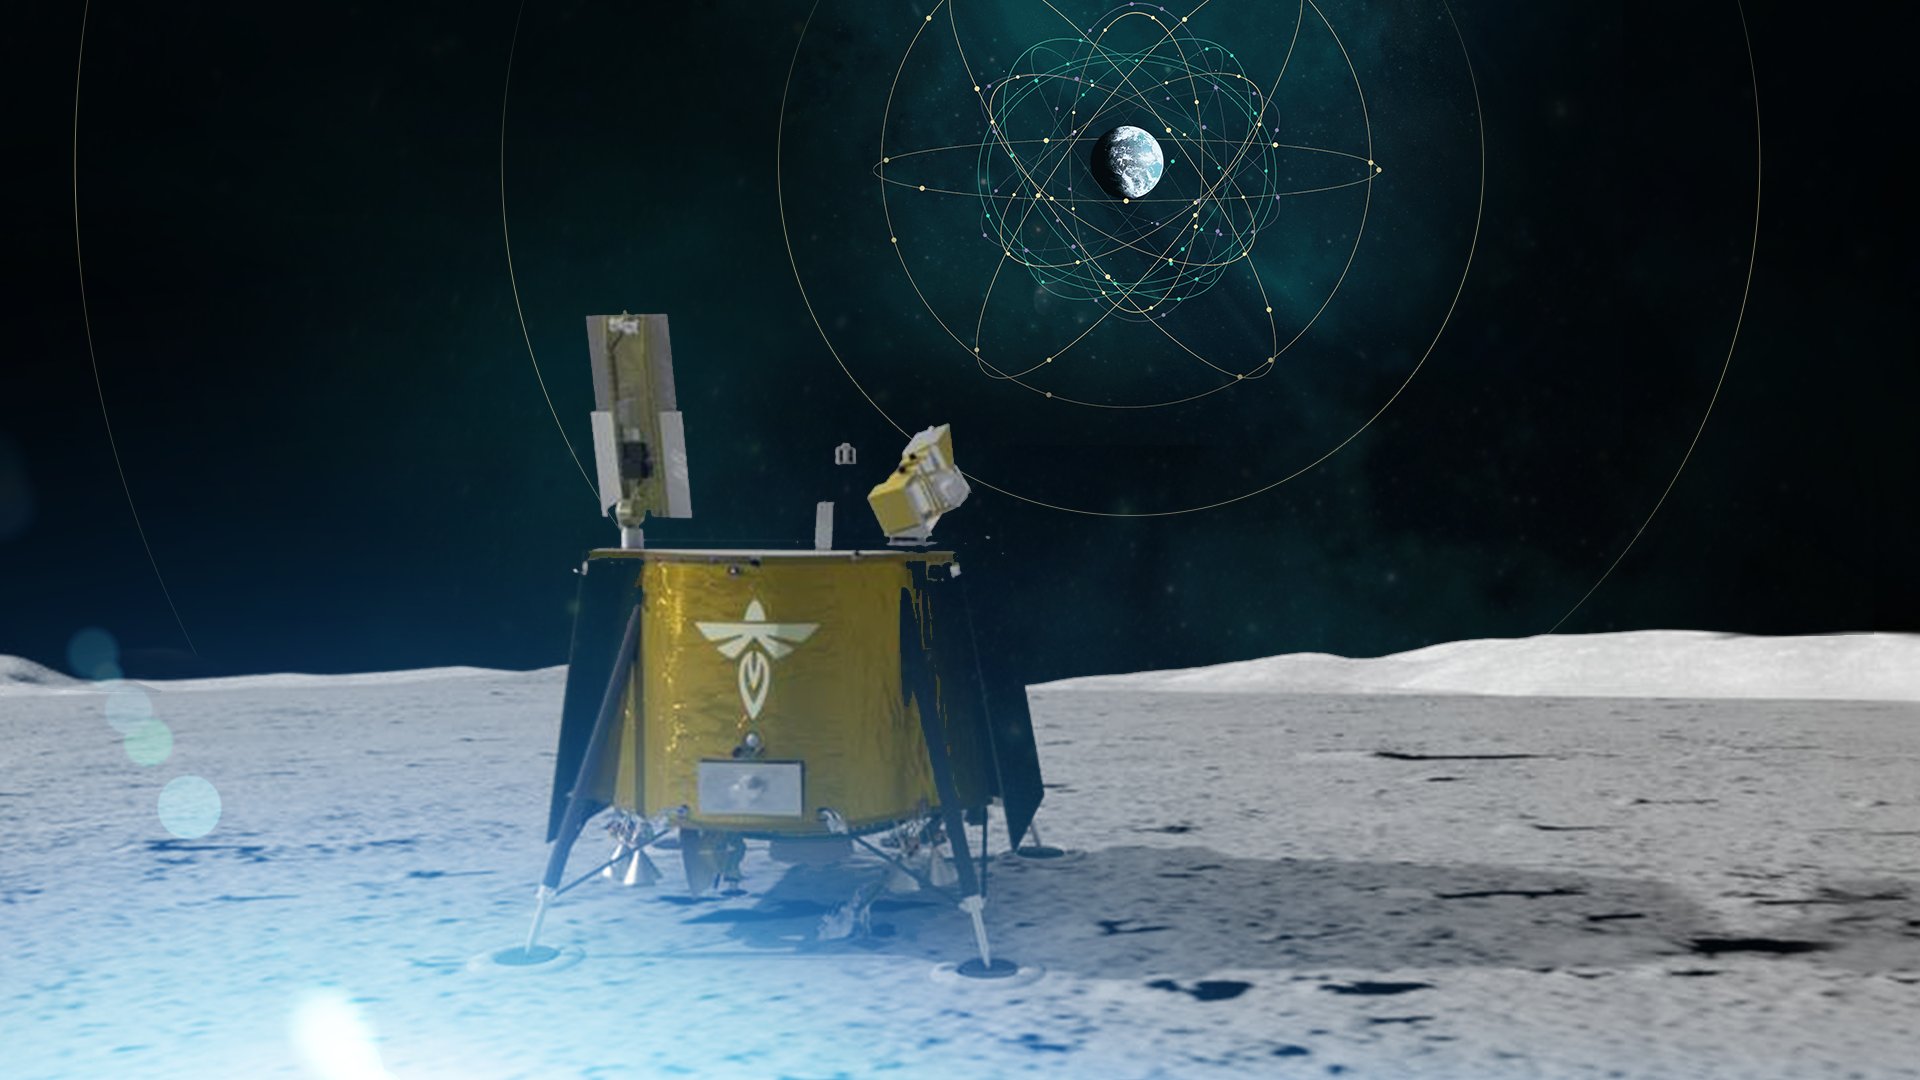 NASA mission to test powerful new navigation capability on the Moon using Earth's GNSS